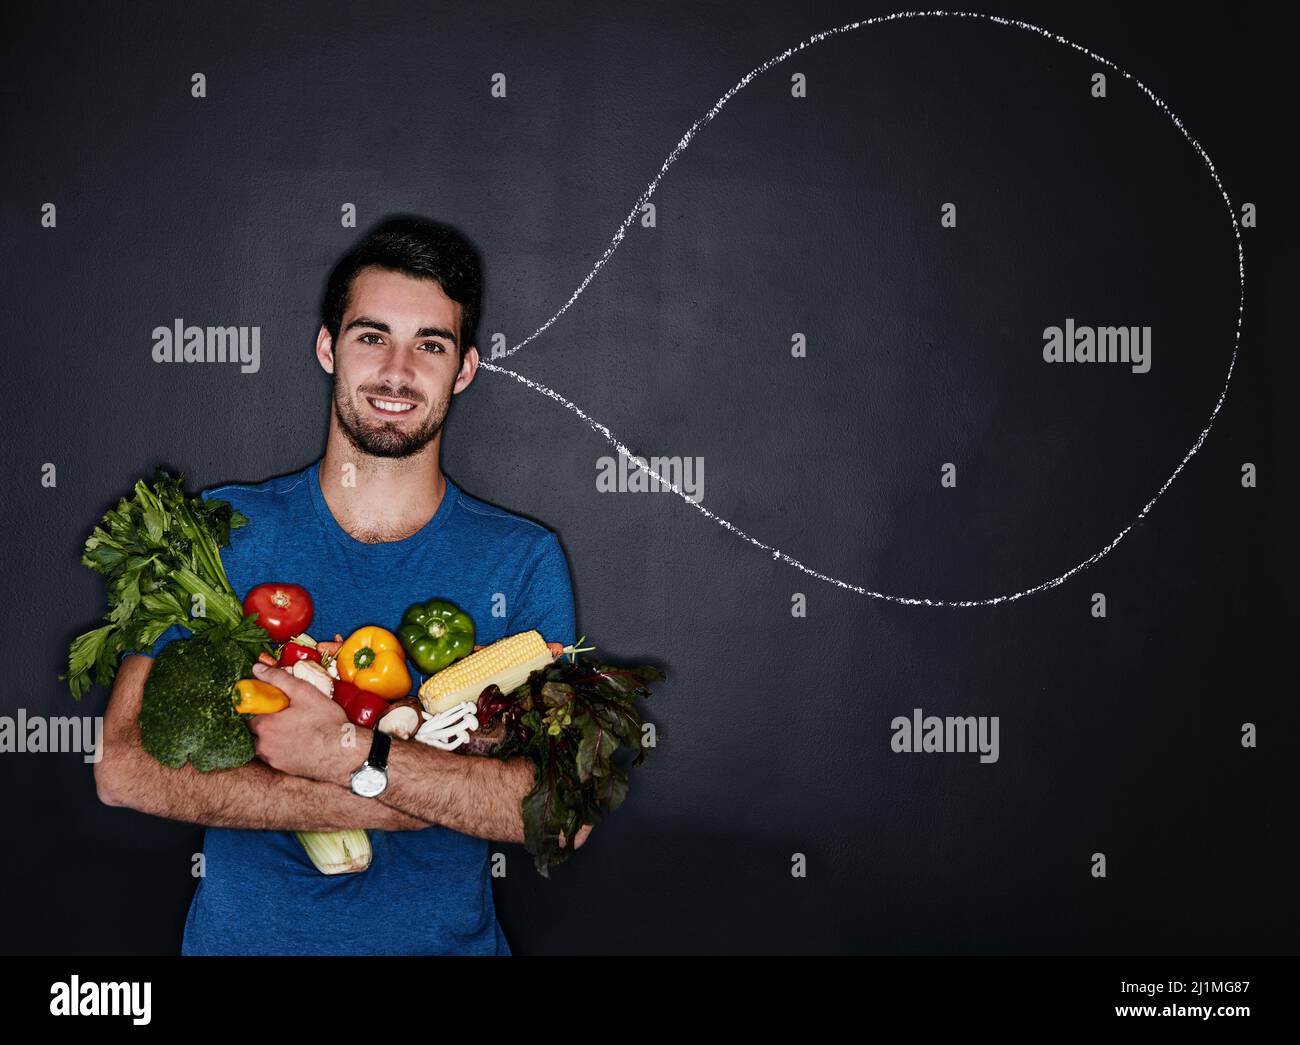 Eat clean and feel good. Studio portrait of a young man carrying vegetables next to an illustration of a thought bubble against a dark background. Stock Photo